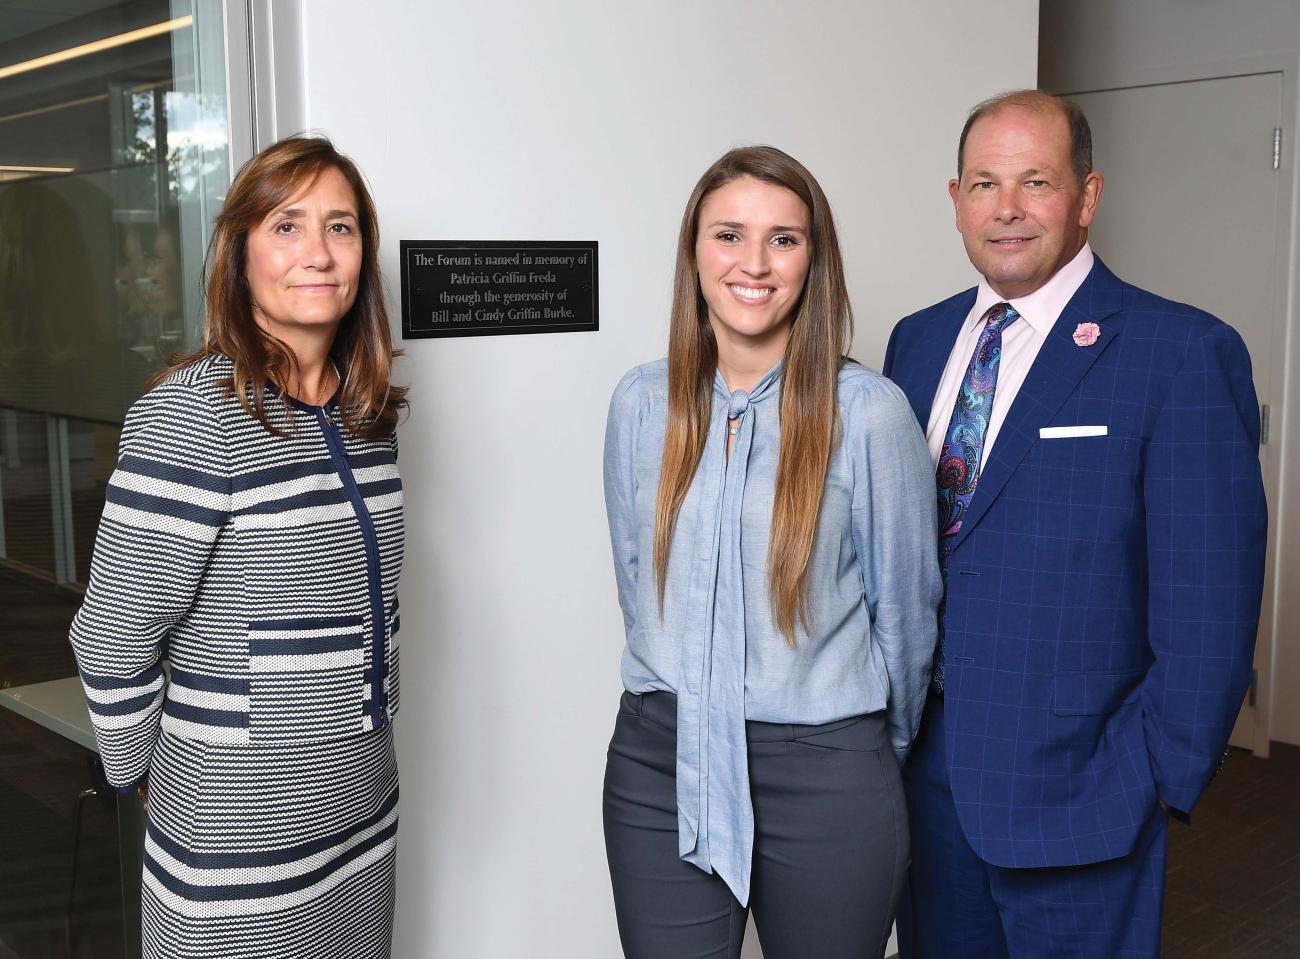 Cindy Burke, from left, Avery Pedro, and Bill Burke meet in the Learning Commons near the plaque dedicating The Forum to Cindy’s mother.